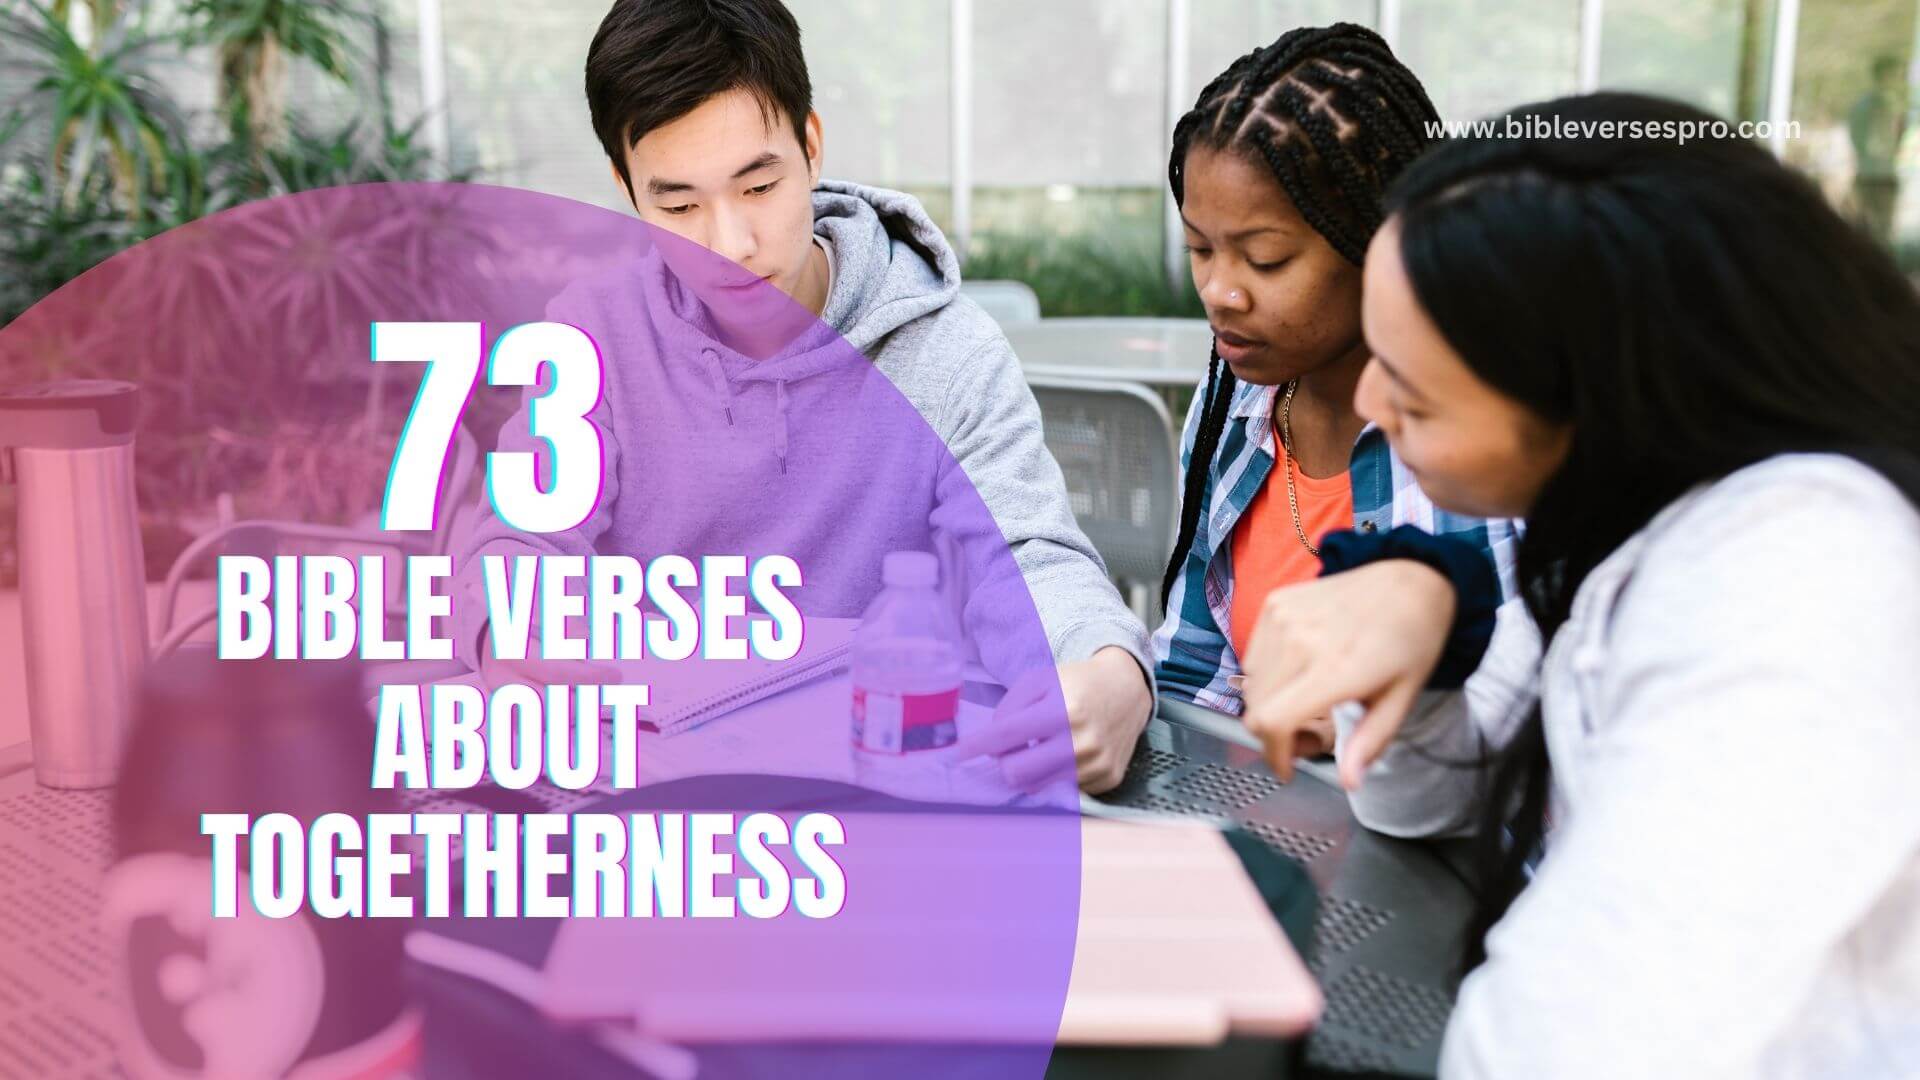 BIBLE VERSES ABOUT TOGETHERNESS